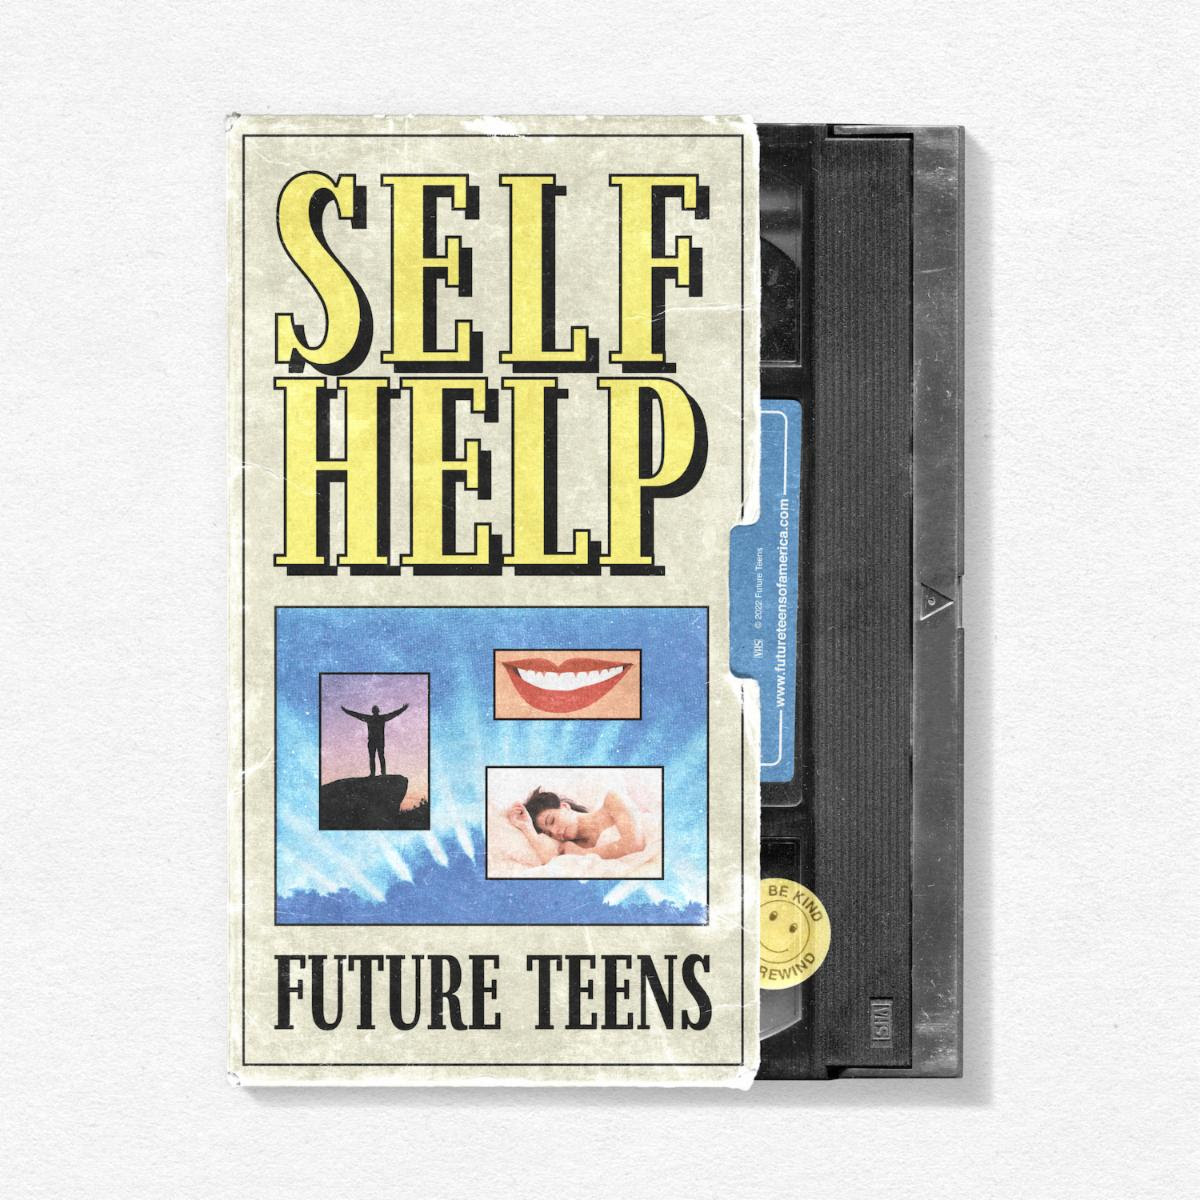 A partial view of an old VHS tape in a box with stylizzed, brightly colored text that says "Self Help, Future Teens" on the box